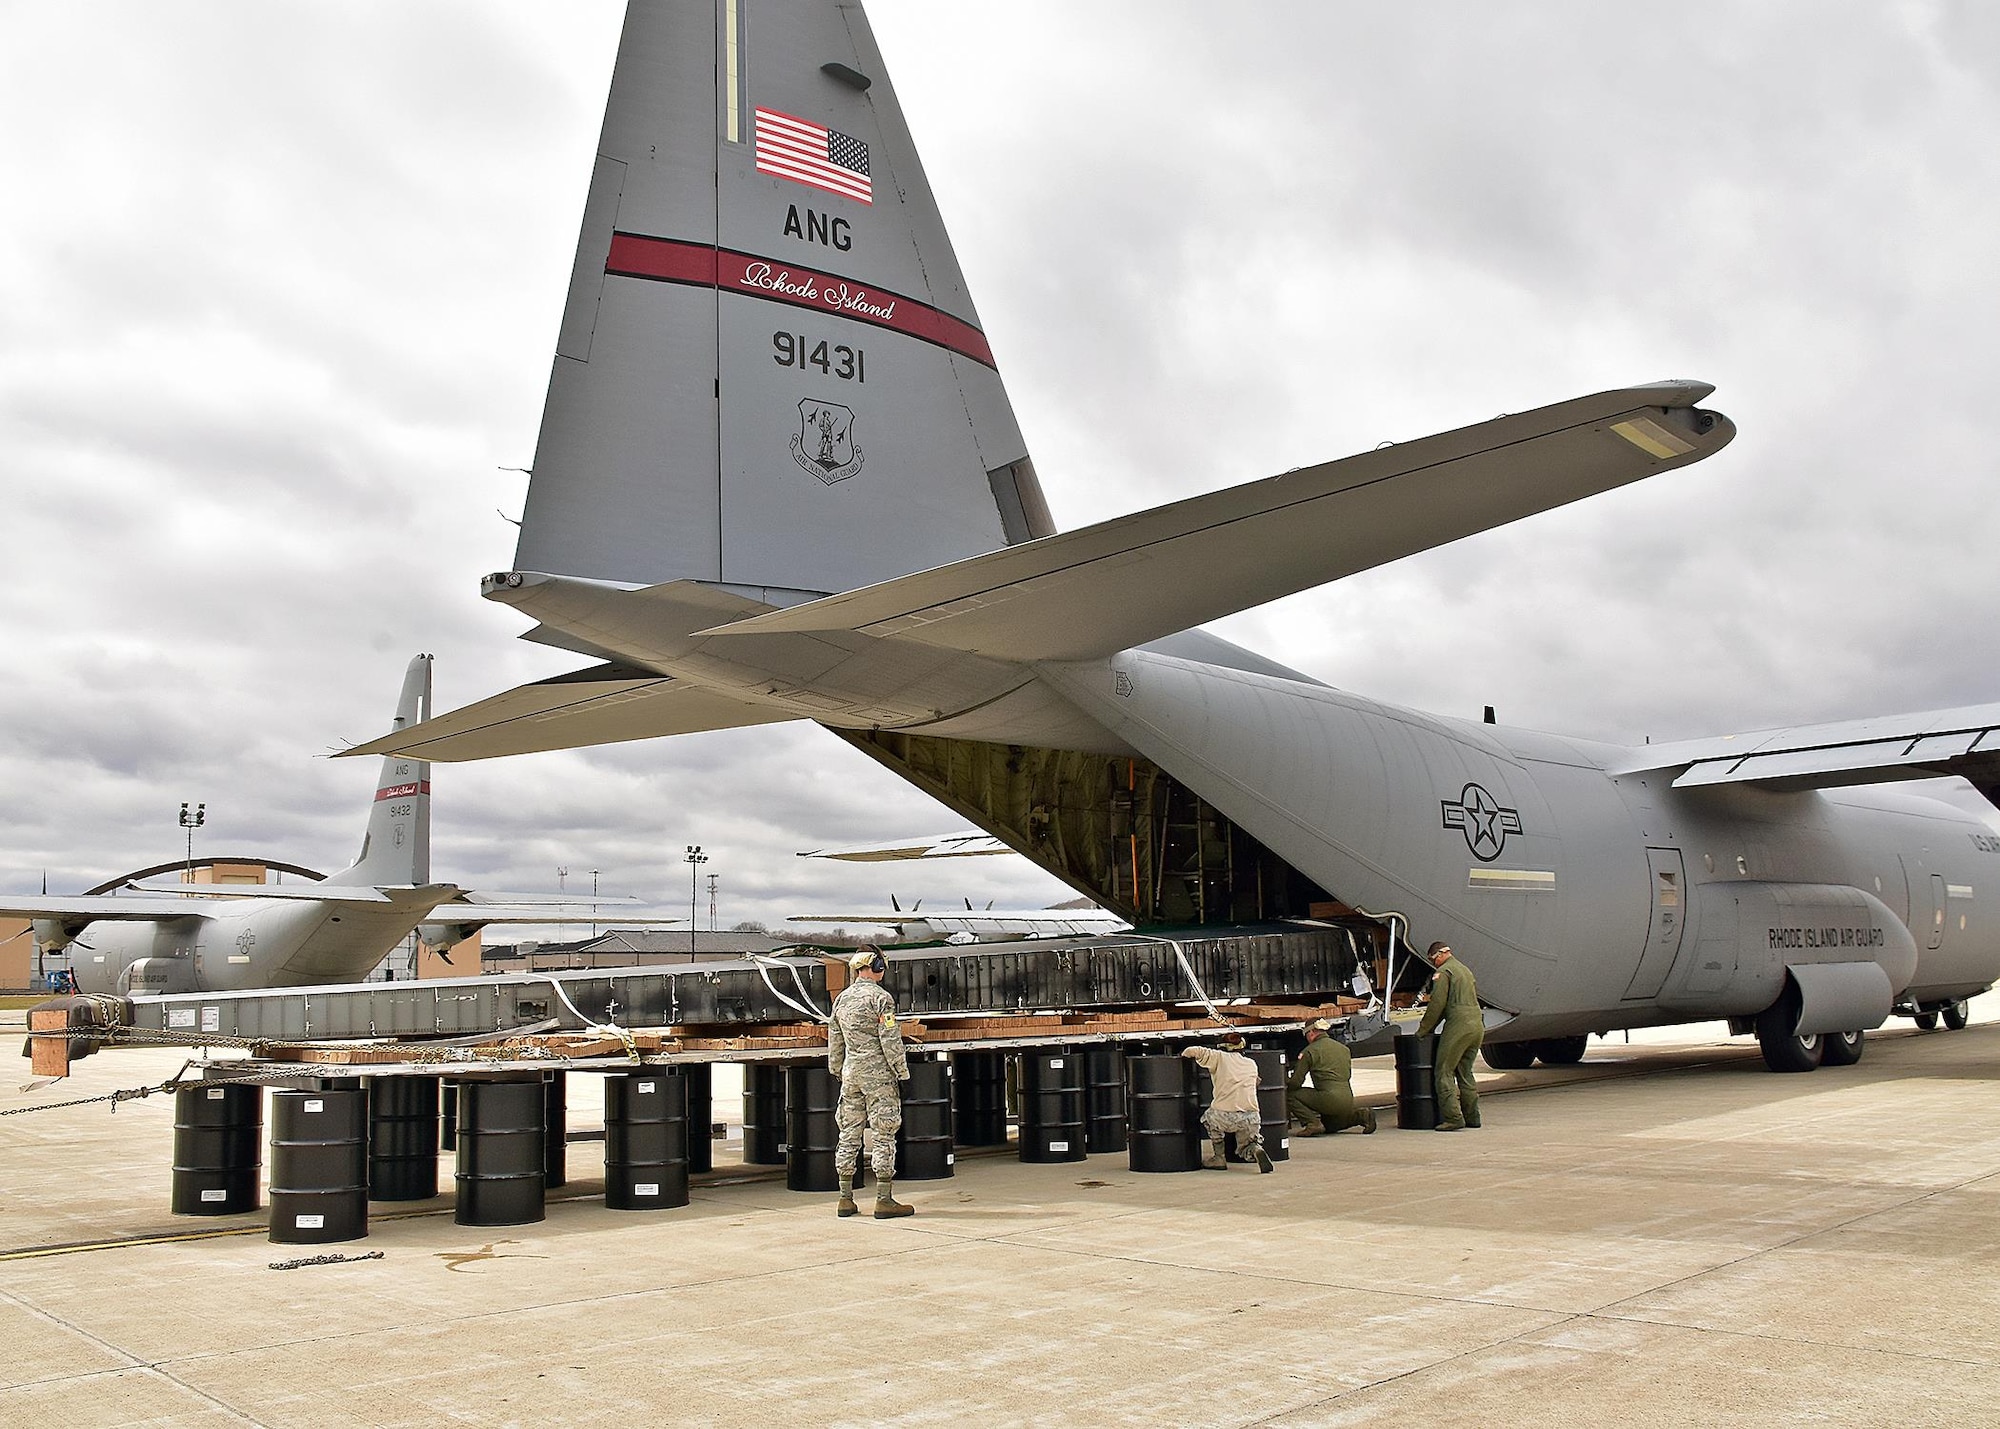 Airmen from the 143d Airlift Wing's Maintenance Group, Operations Group and Logistics Readiness Squadron work together to plan and complete the offload of a detached C-130 wing from the back of a C-130J using the Combat Offload Method B technique. The wing was secured to be used for training by Fuel Cell Airmen, Safety, and Fire personnel.